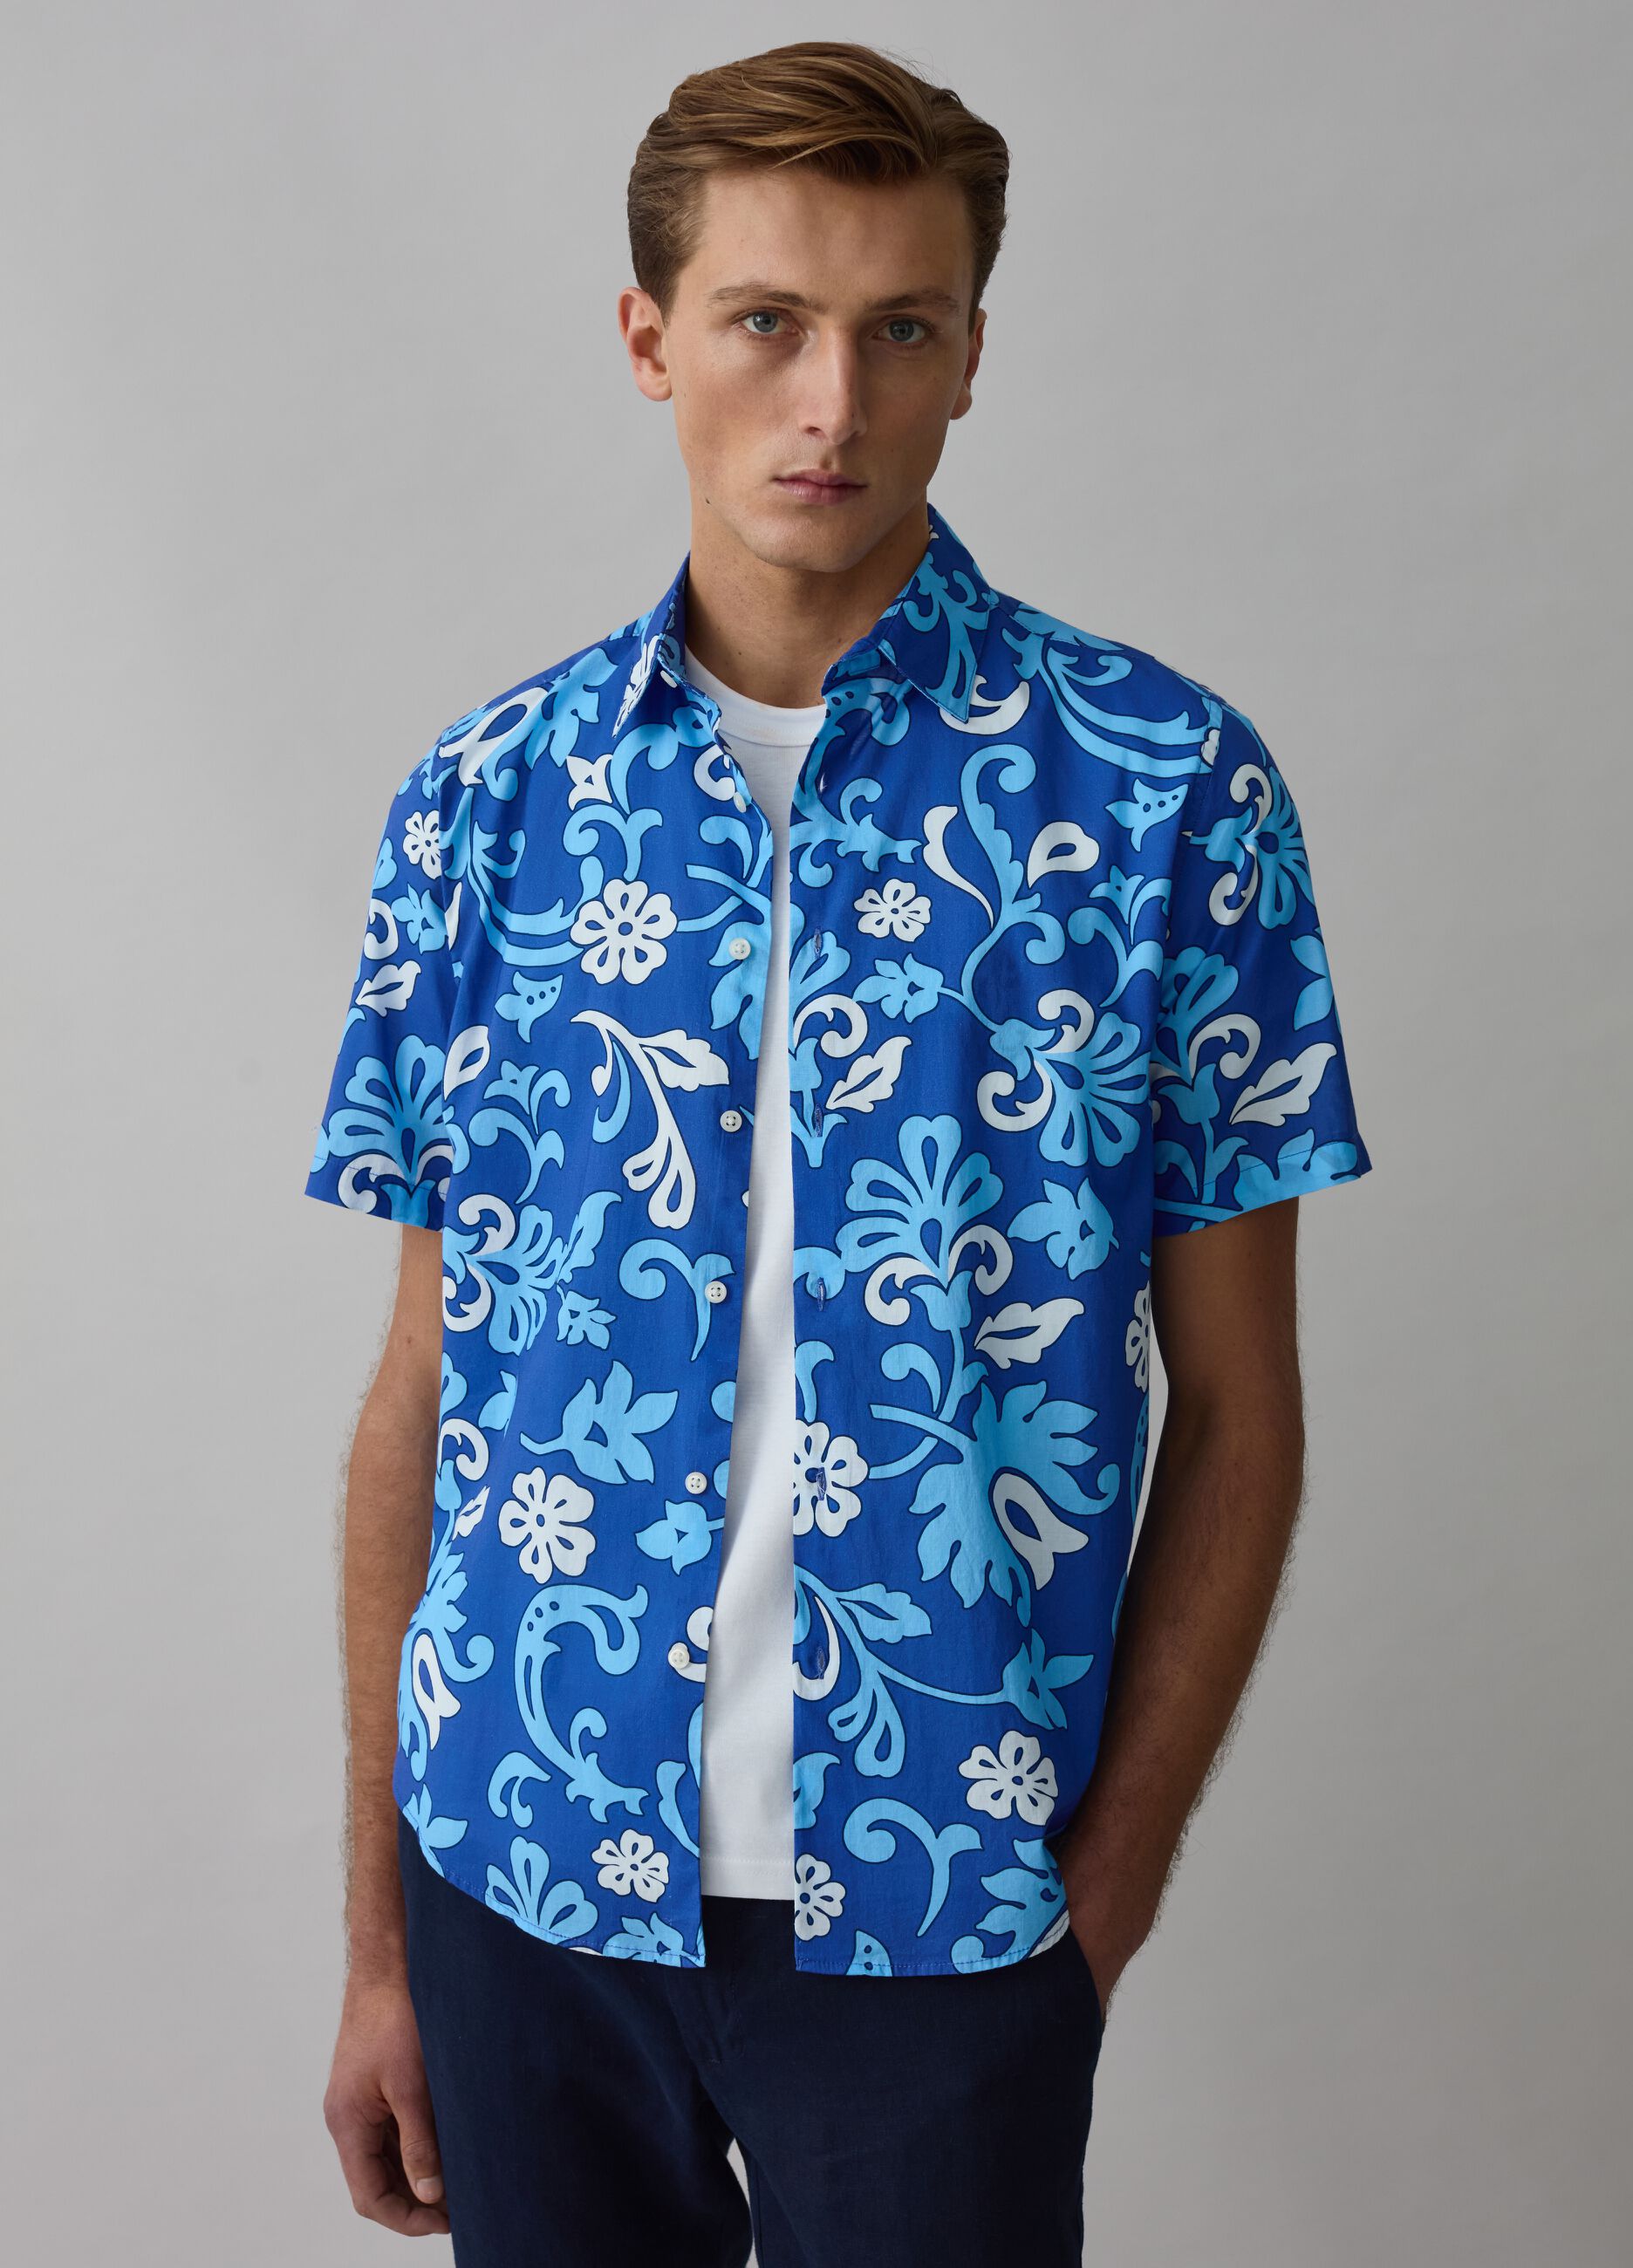 Floral shirt with short sleeves